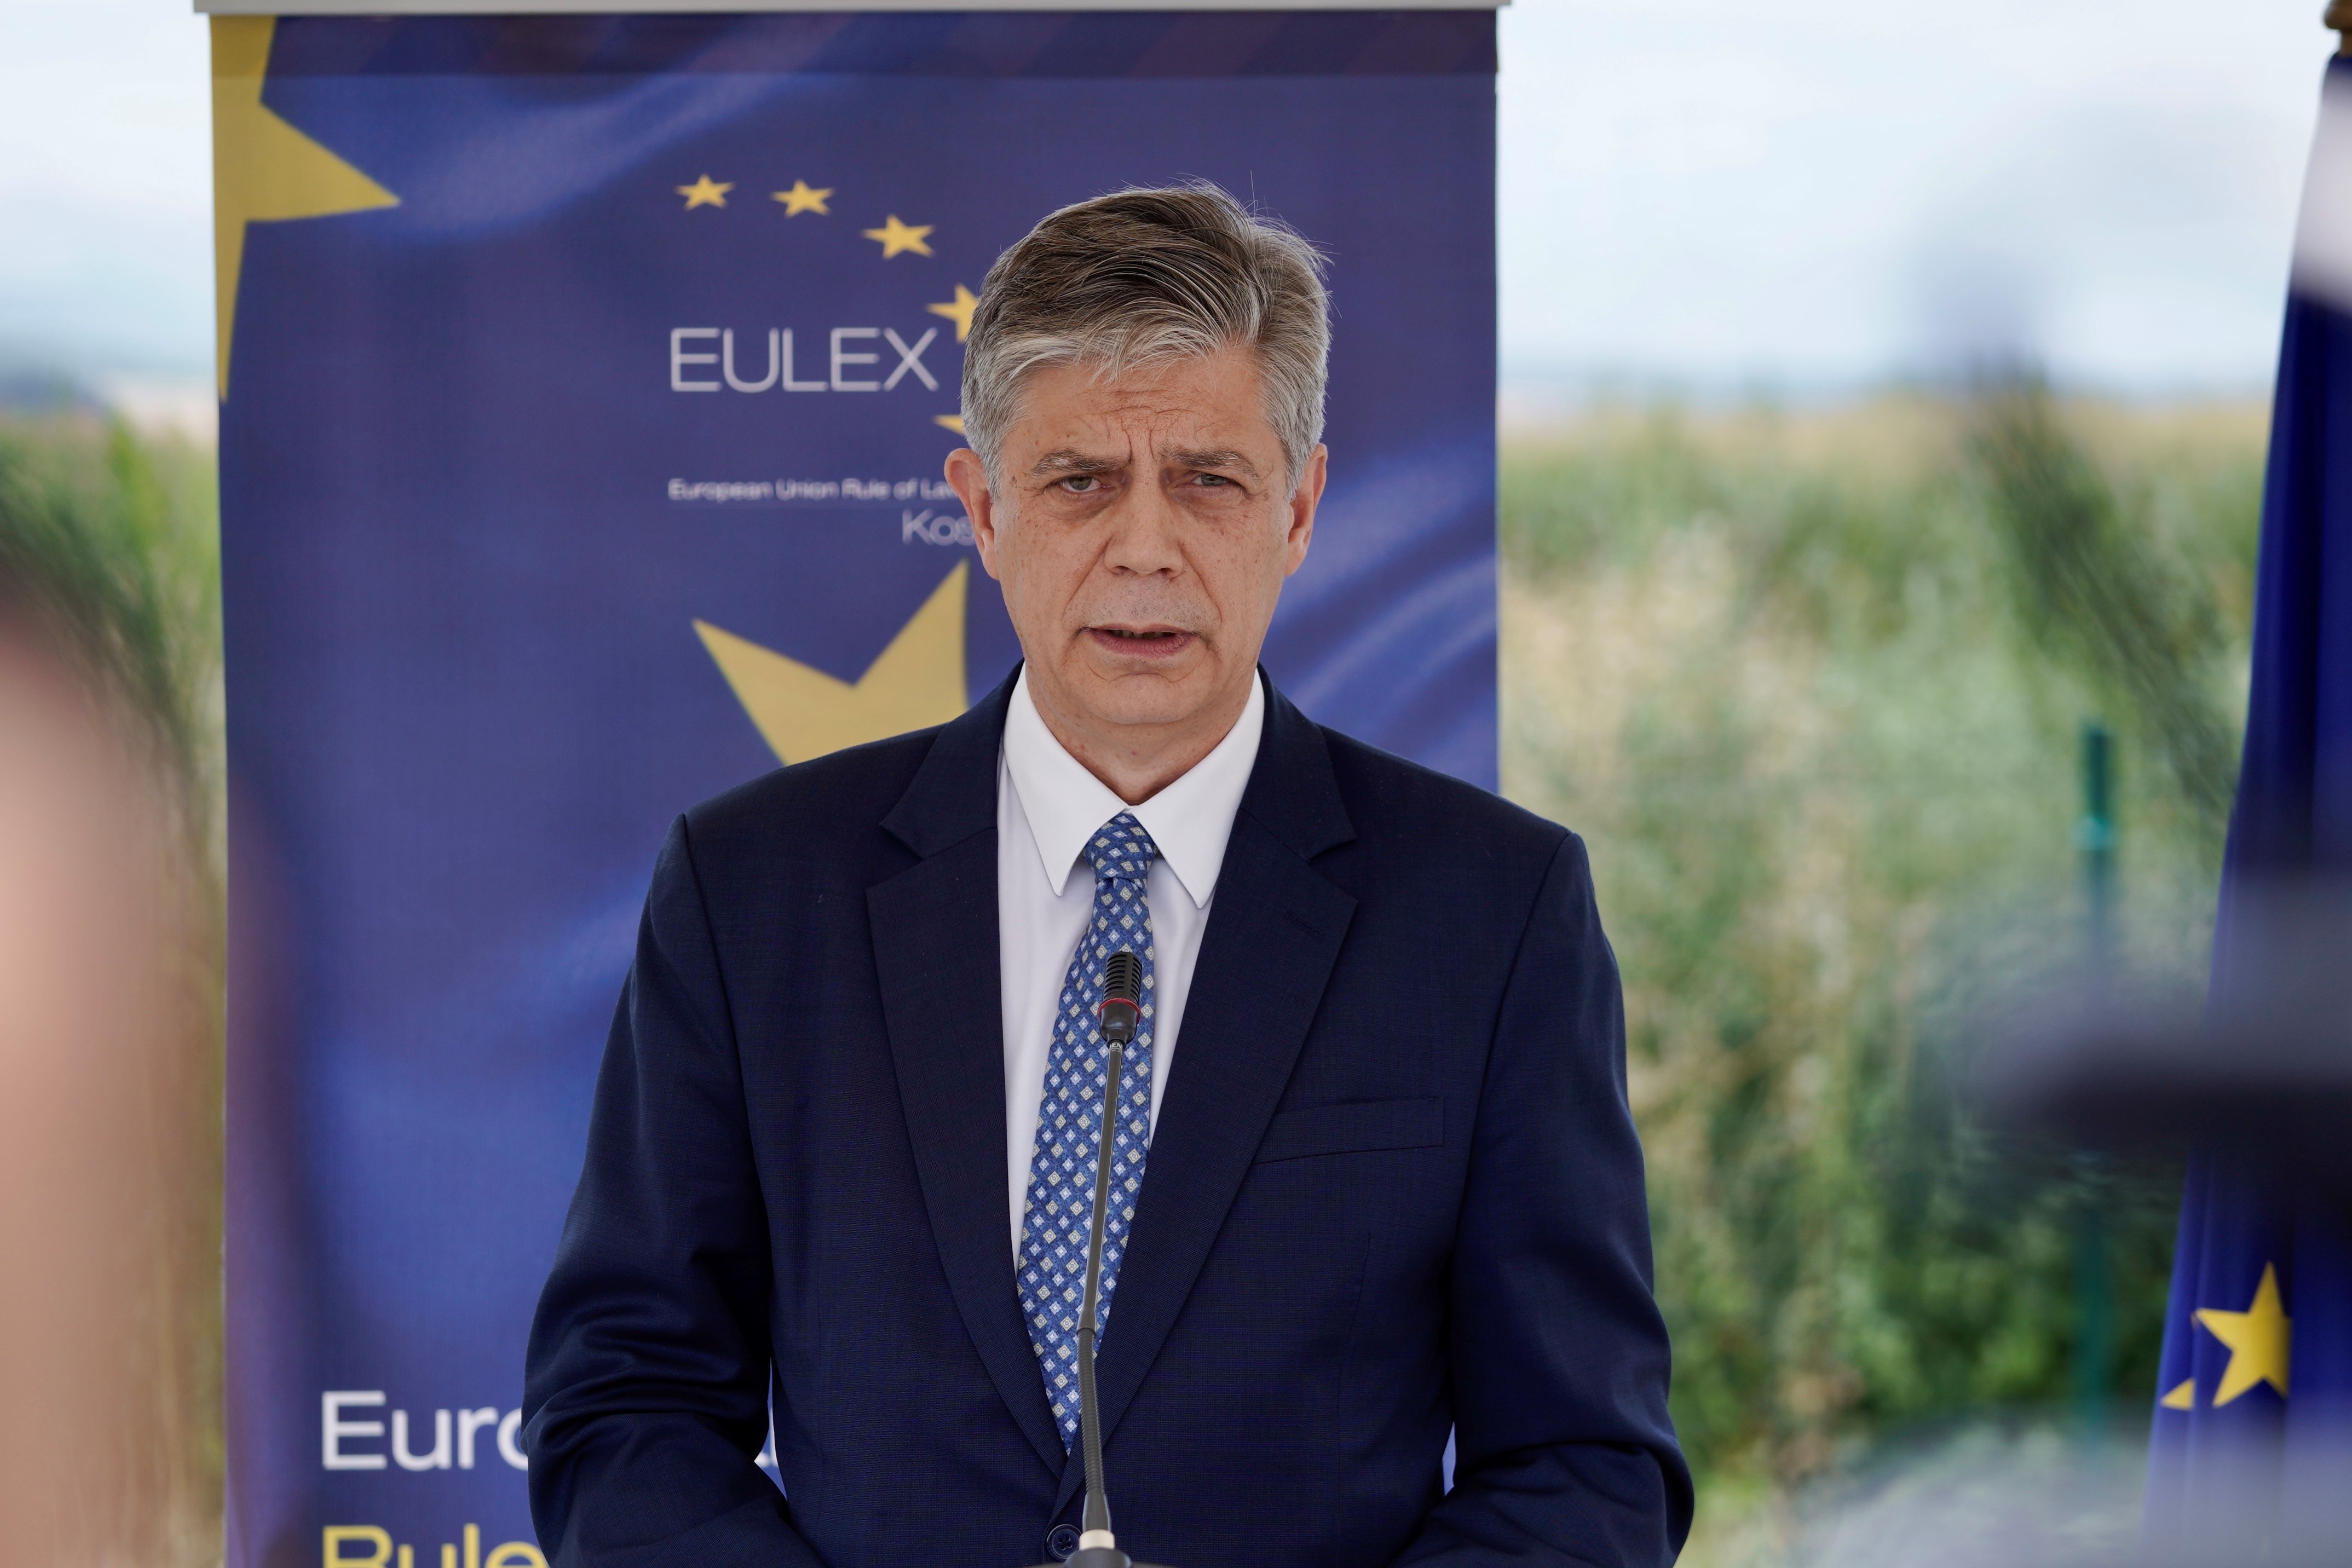 Speech by the Head of Mission during EULEX Donation to Agriculture Cooperative Krusha